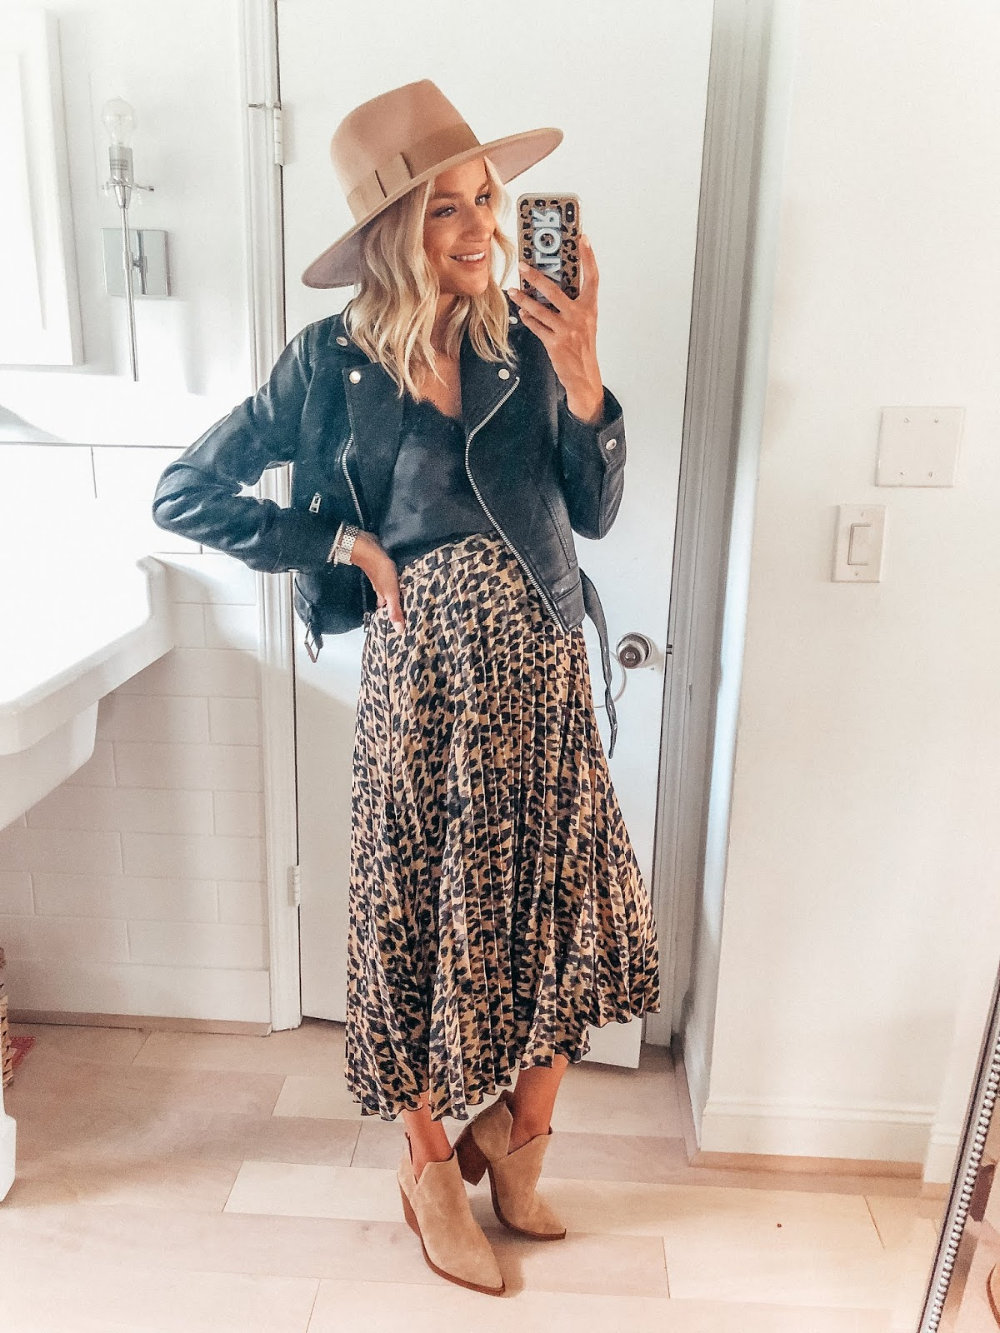 Cute Dresses, Tops, Shoes, Jewelry & Clothing for Women - Cute Dresses, Tops, Shoes, Jewelry & Clothing for Women -   17 style 2019 skirt ideas